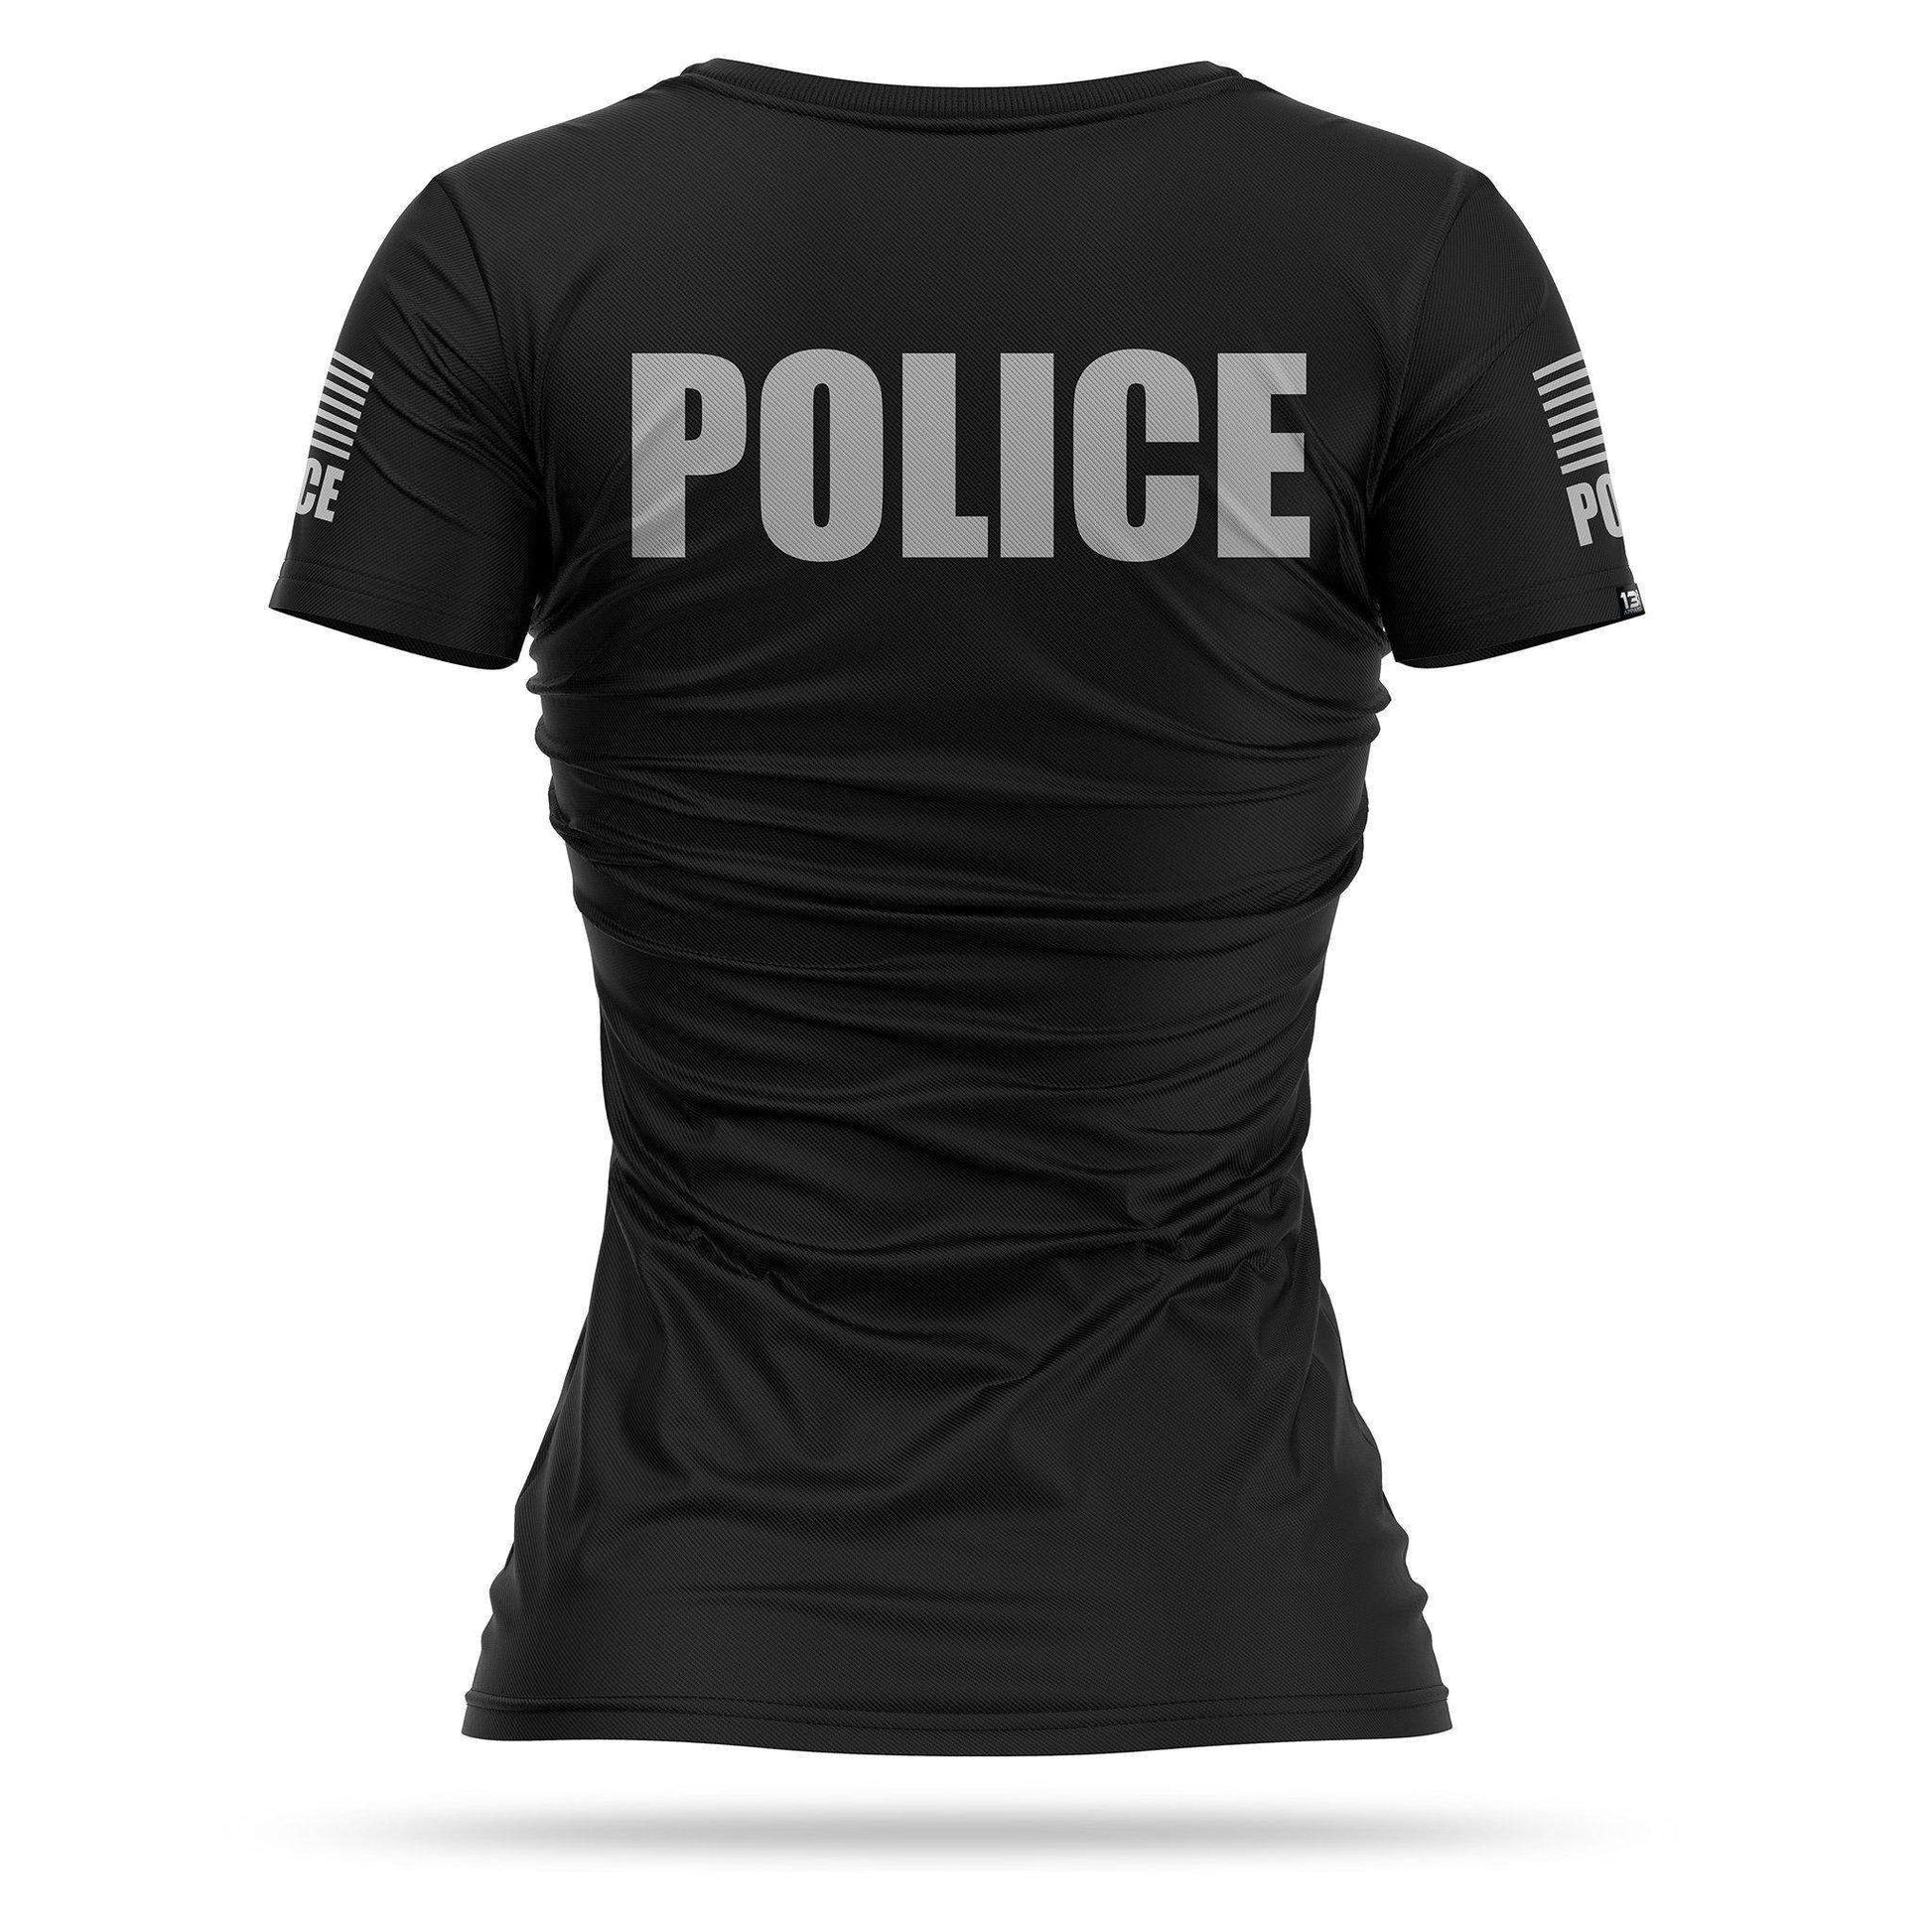 [POLICE] Women's Performance Shirt [BLK/GRY]-13 Fifty Apparel